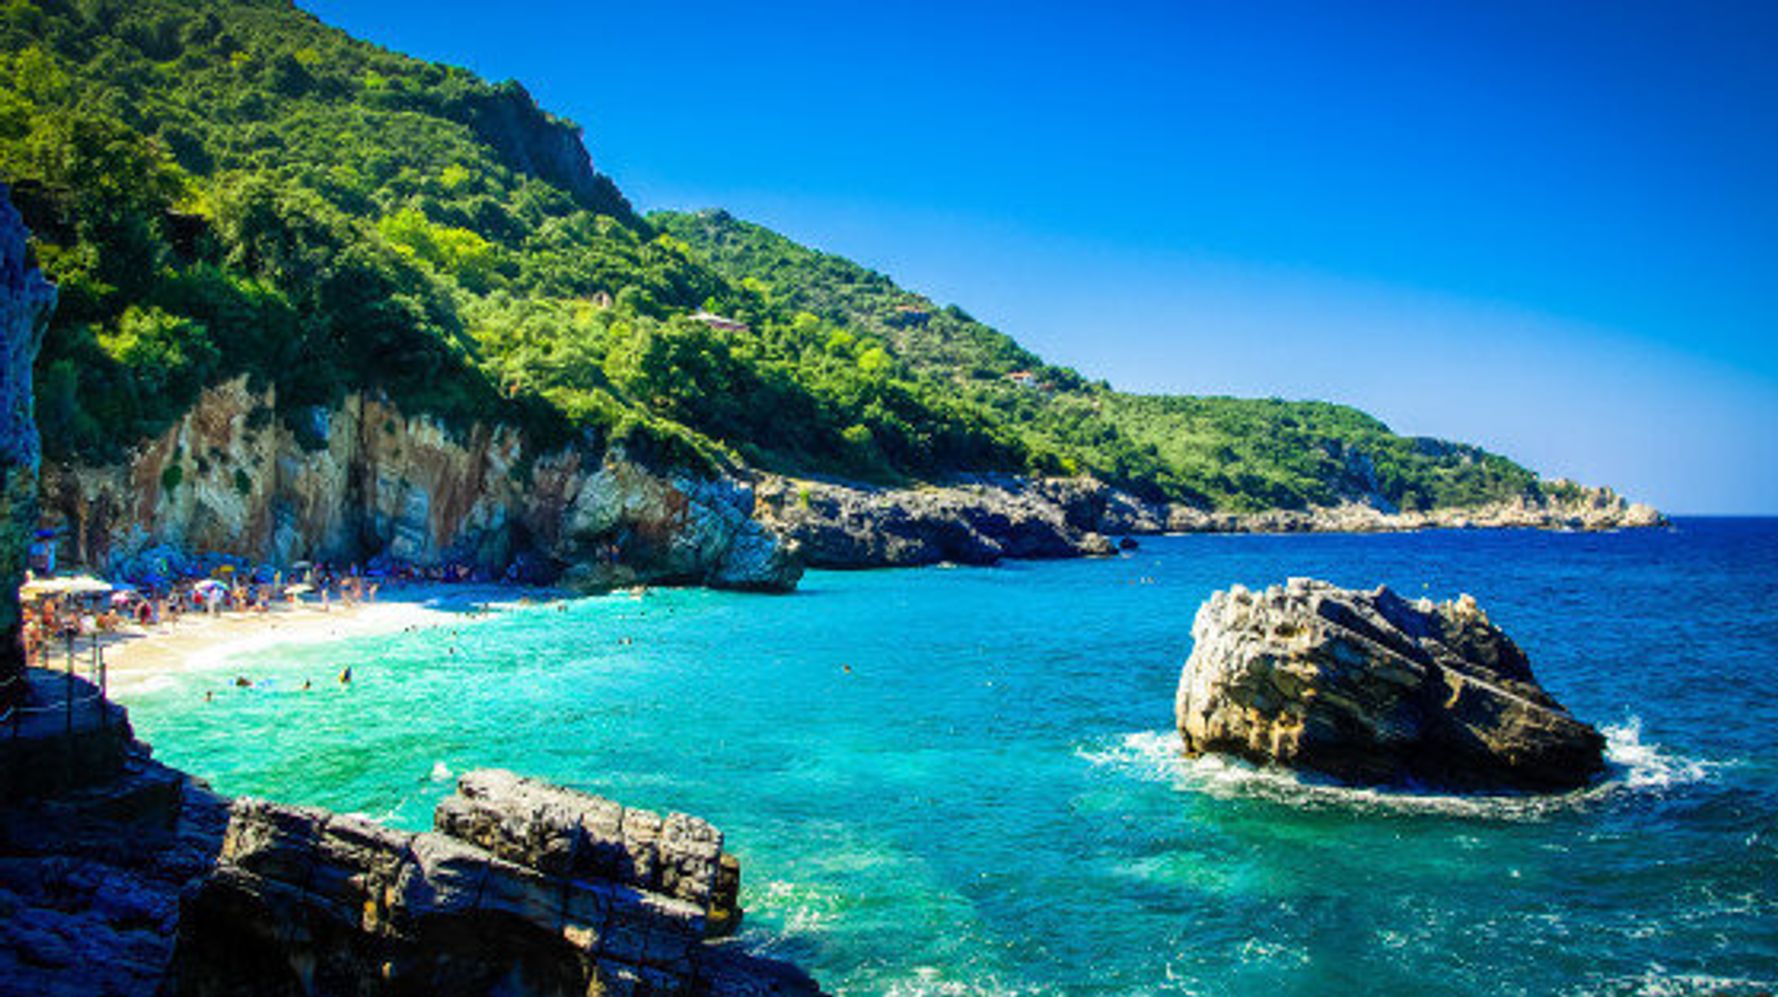 Soak Up The Sun At Some Of The Best Beaches Around The World | HuffPost